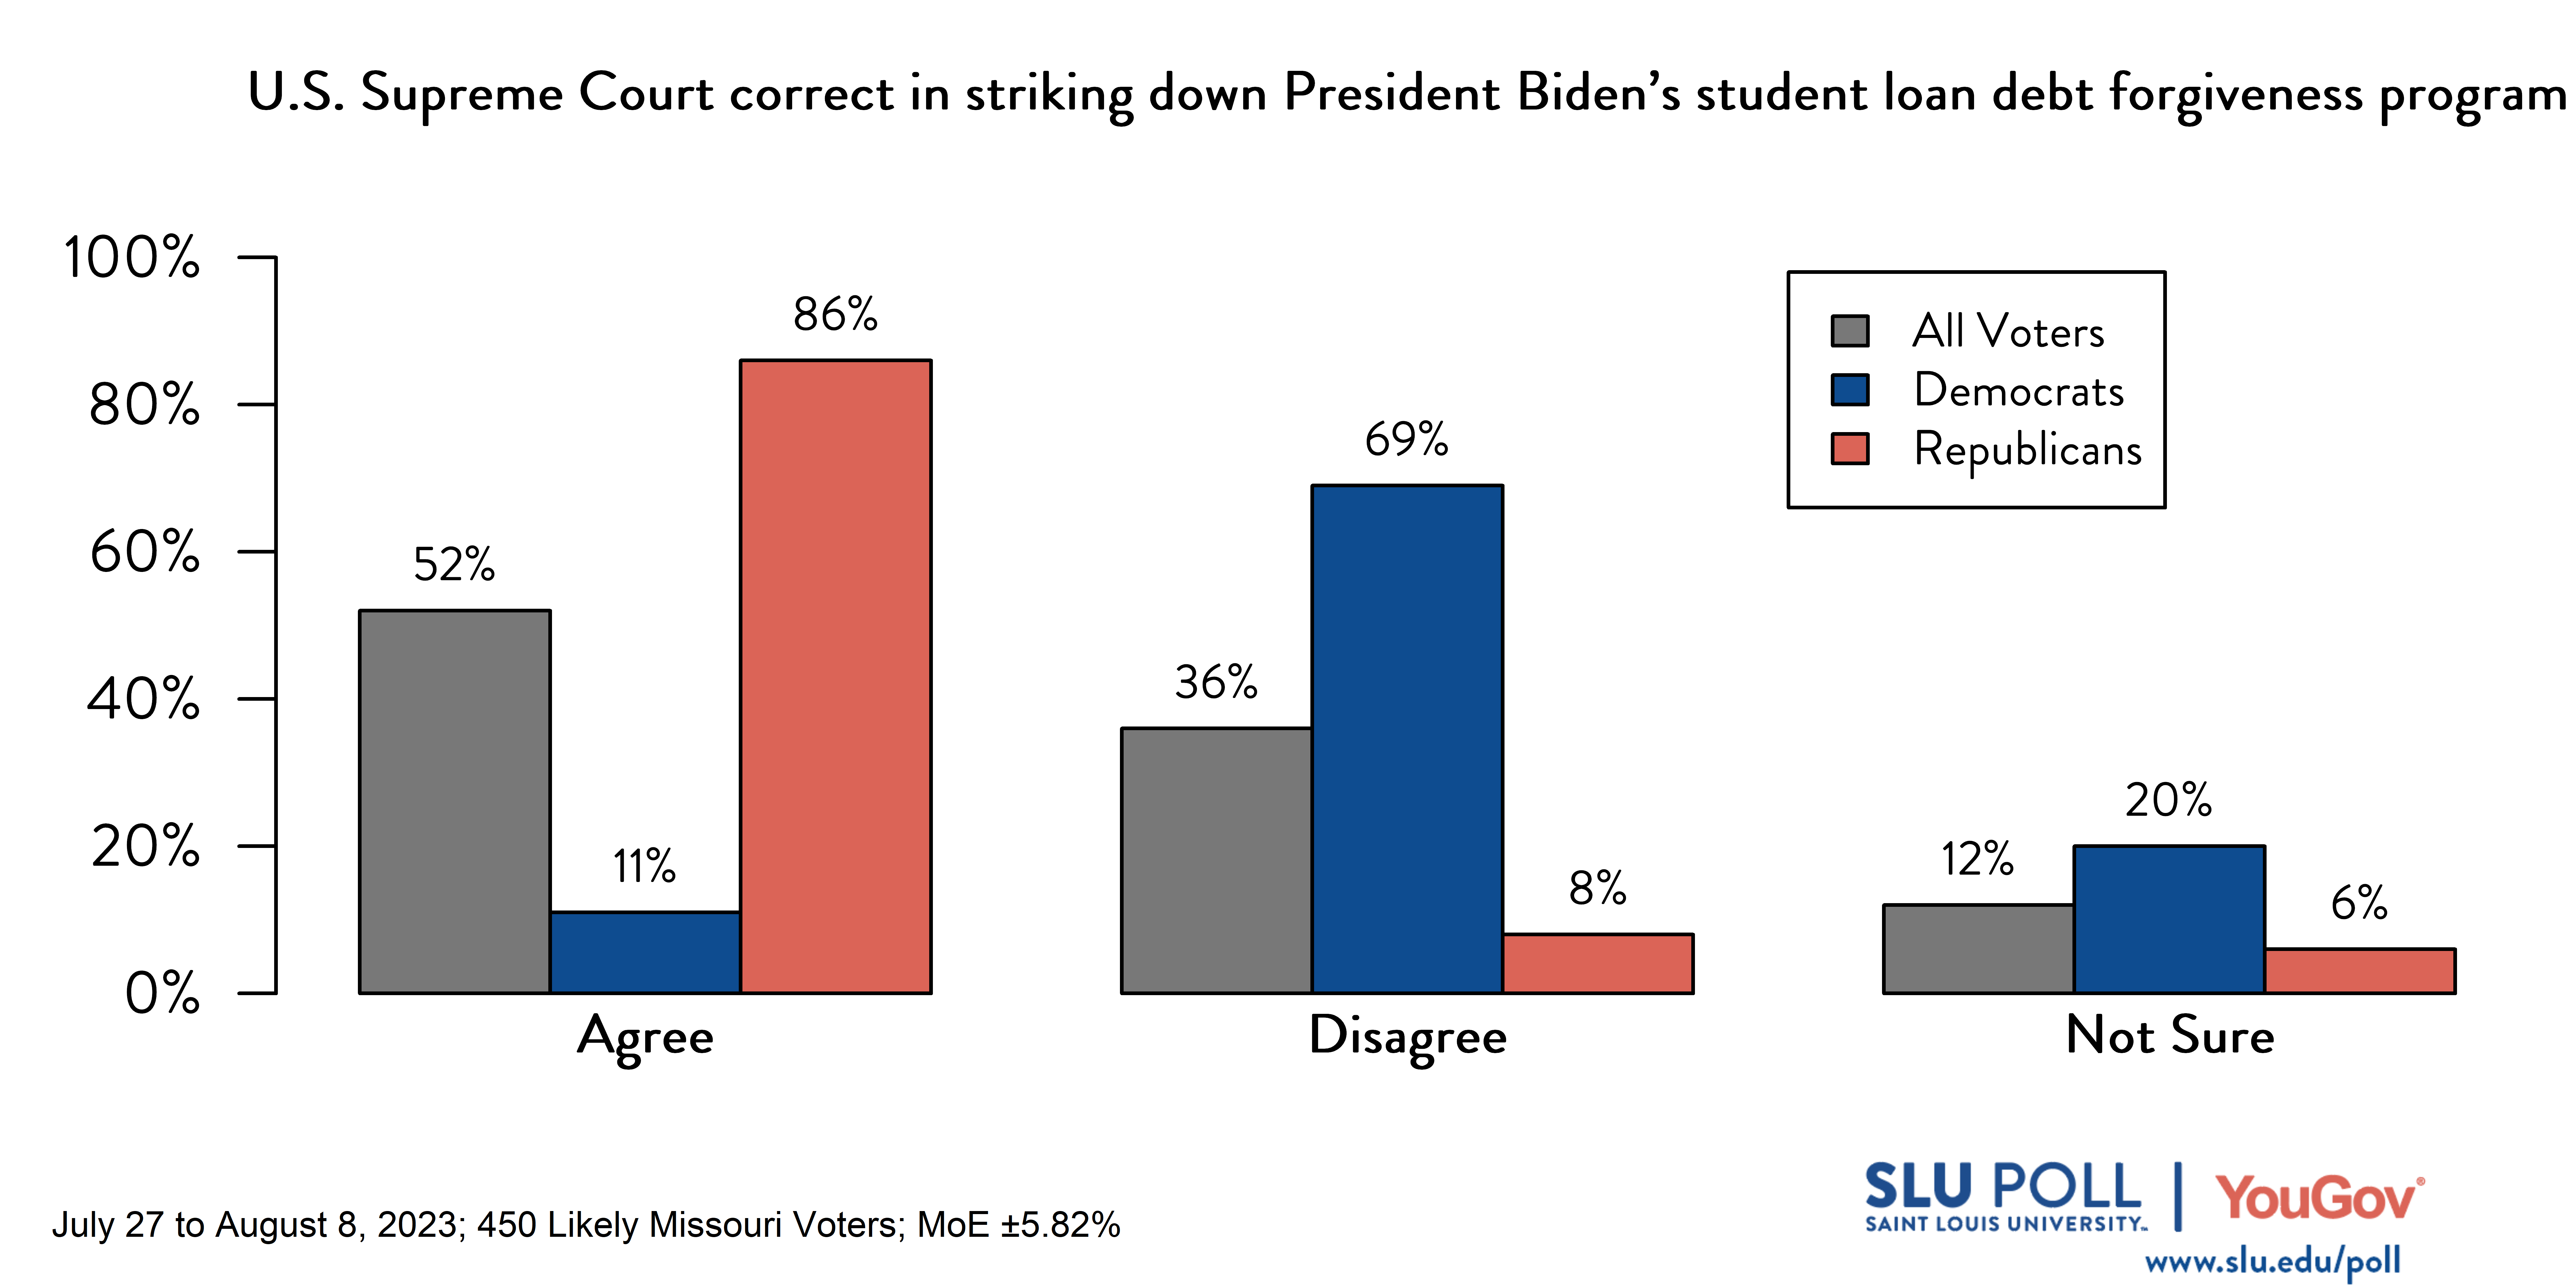 Likely voters' responses to 'Do you agree or disagree with the following statements: The U.S. Supreme Court was correct in striking down President Biden's student loan debt forgiveness program.': 52% Agree, 36% Disagree, and 12% Not Sure. Democratic voters' responses: ' 11% Agree, 69% Disagree, and 20% Not Sure. Republican voters' responses: 86% Agree, 8% Disagree, and 6% Not Sure.